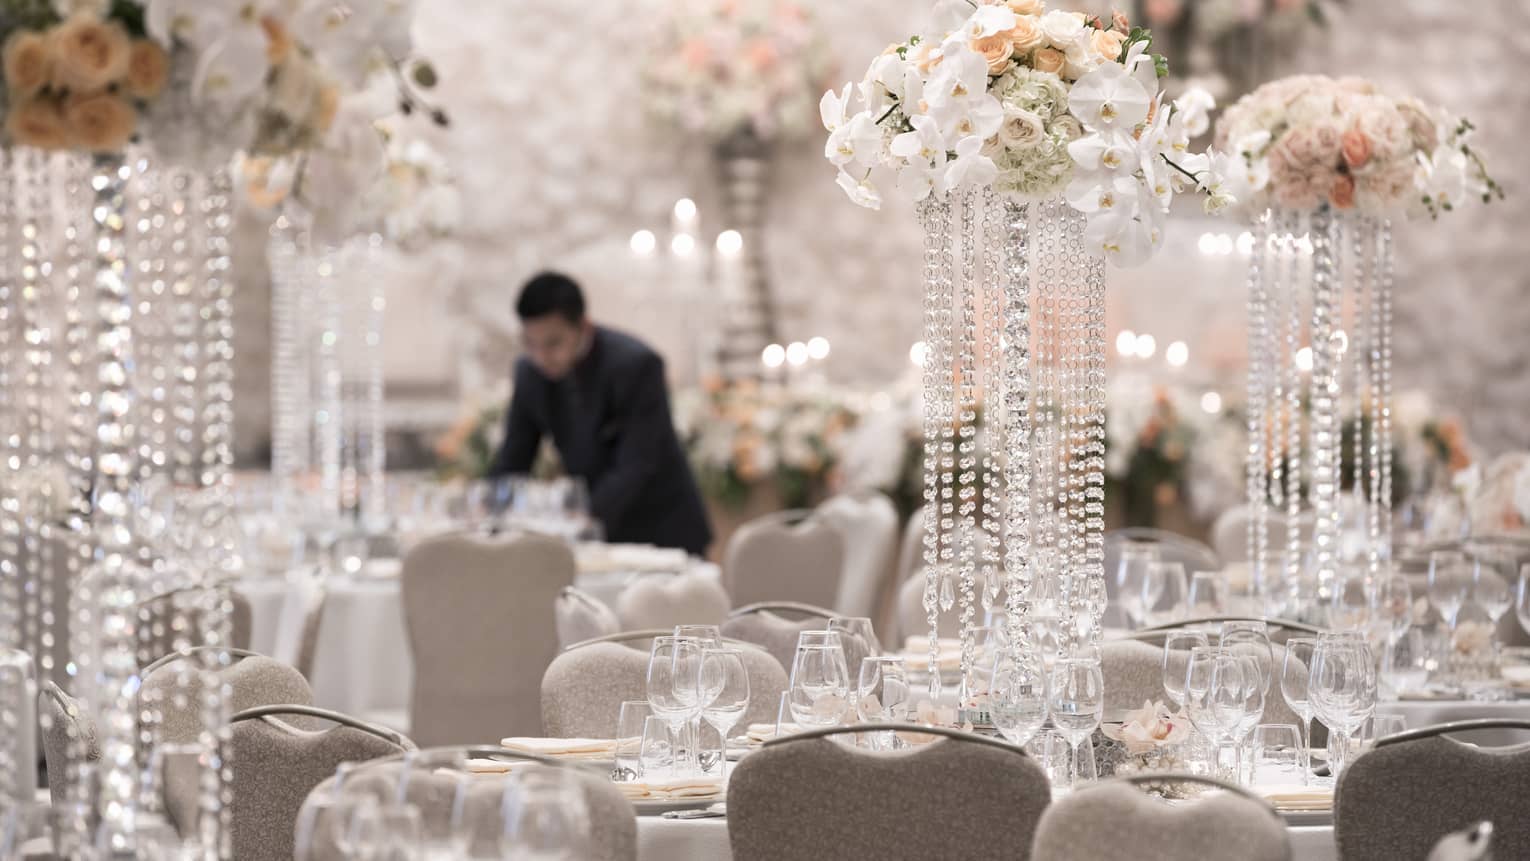 Hotel staff sets elegant ballroom banquet tables with white flowers, crystal ware 